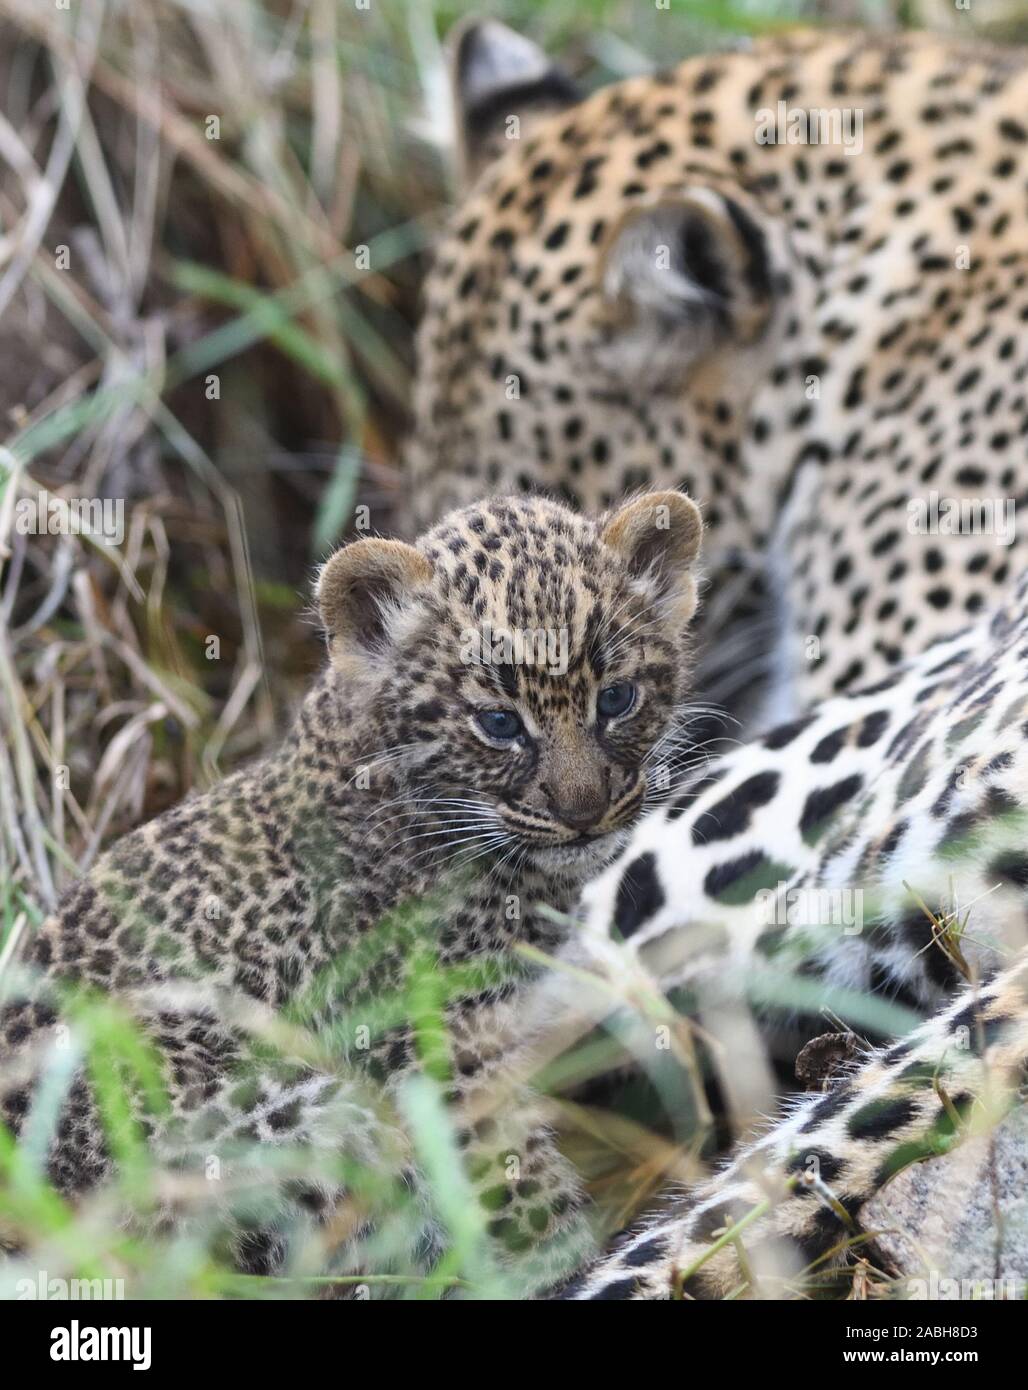 A very young leopard (Panthera pardus) cub, its eyes still blue,  with its mother outside their den. Serengeti National Park, Tanzania. Stock Photo